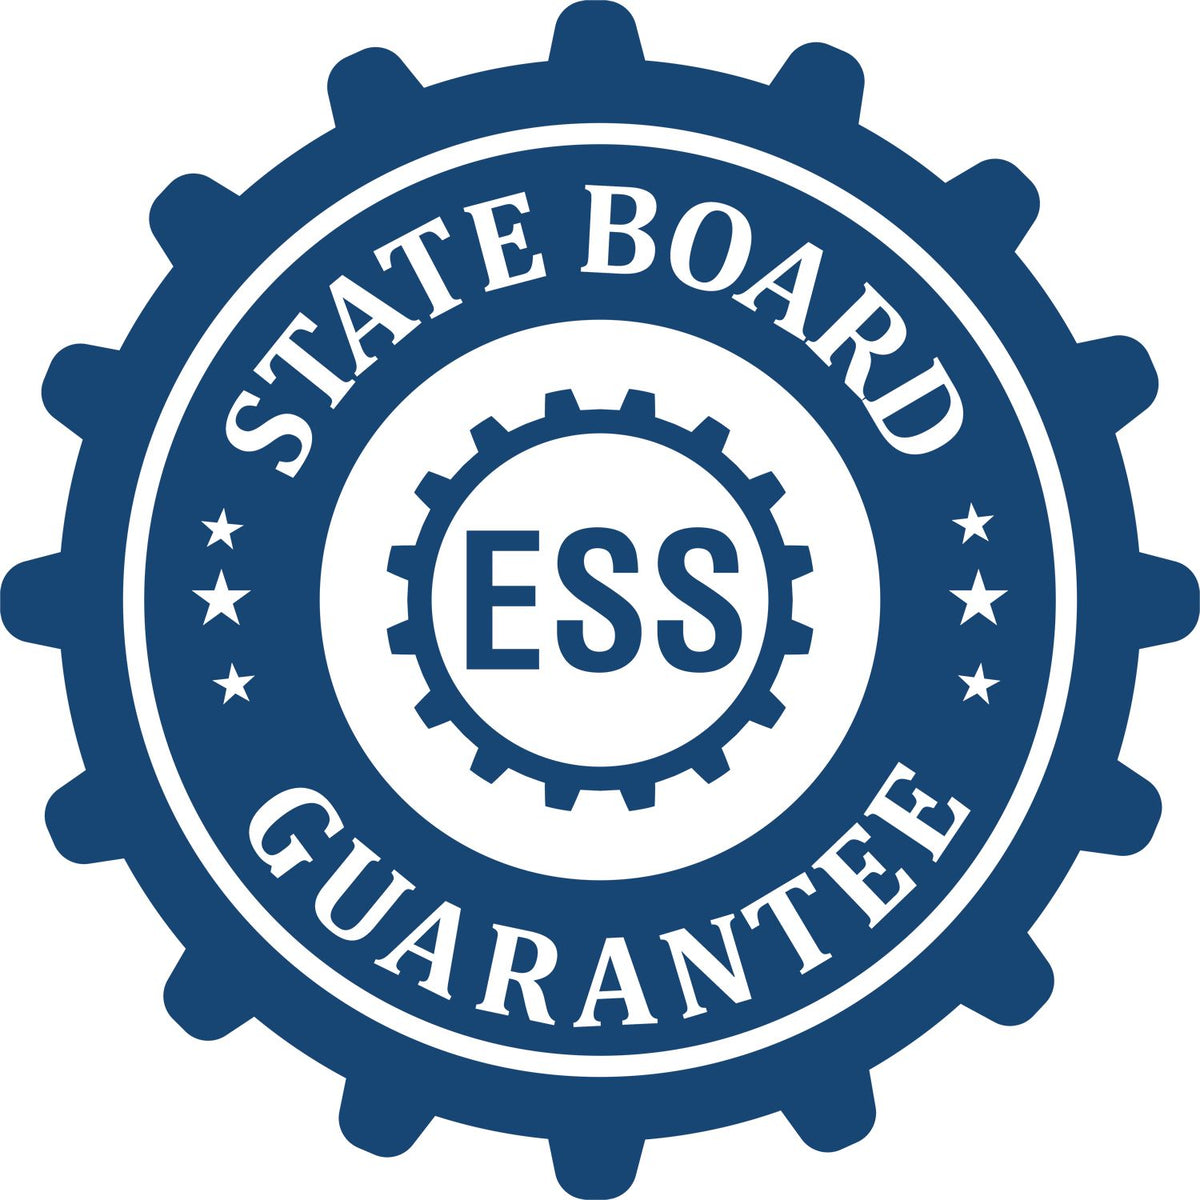 An emblem in a gear shape illustrating a state board guarantee for the California Engineer Desk Seal product.